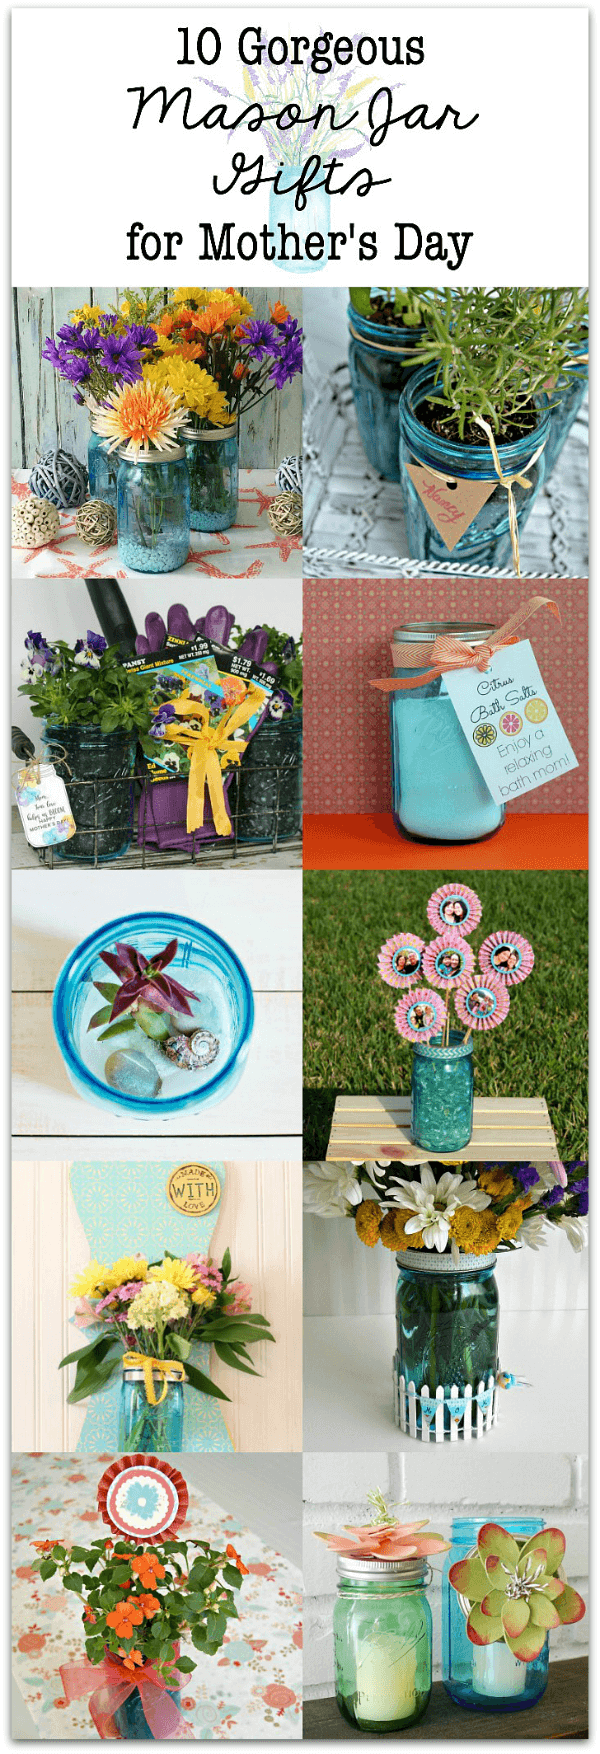 Give Mom one of these 10 Gorgeous Mason Jar Gifts for Her Special Day - Mother's Day